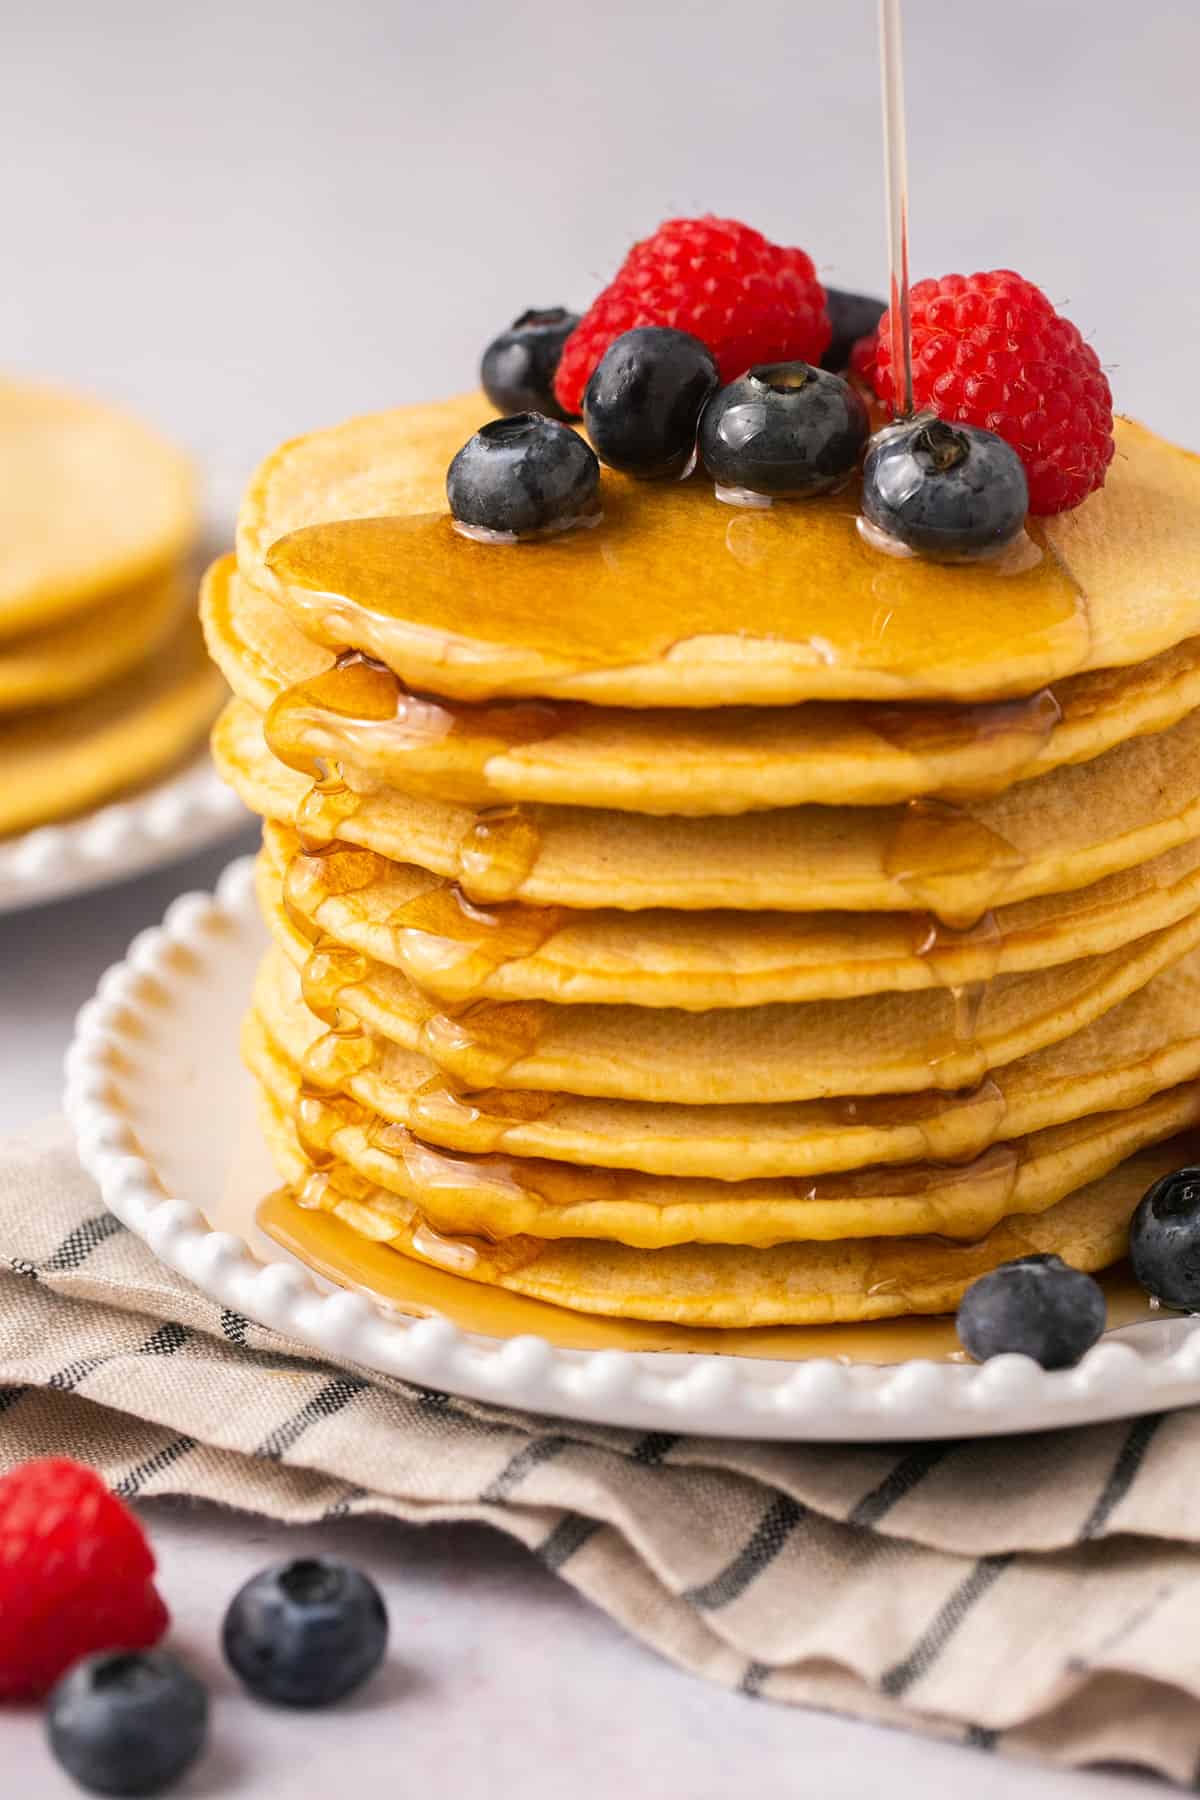 A stack of oat milk pancakes with berries on top